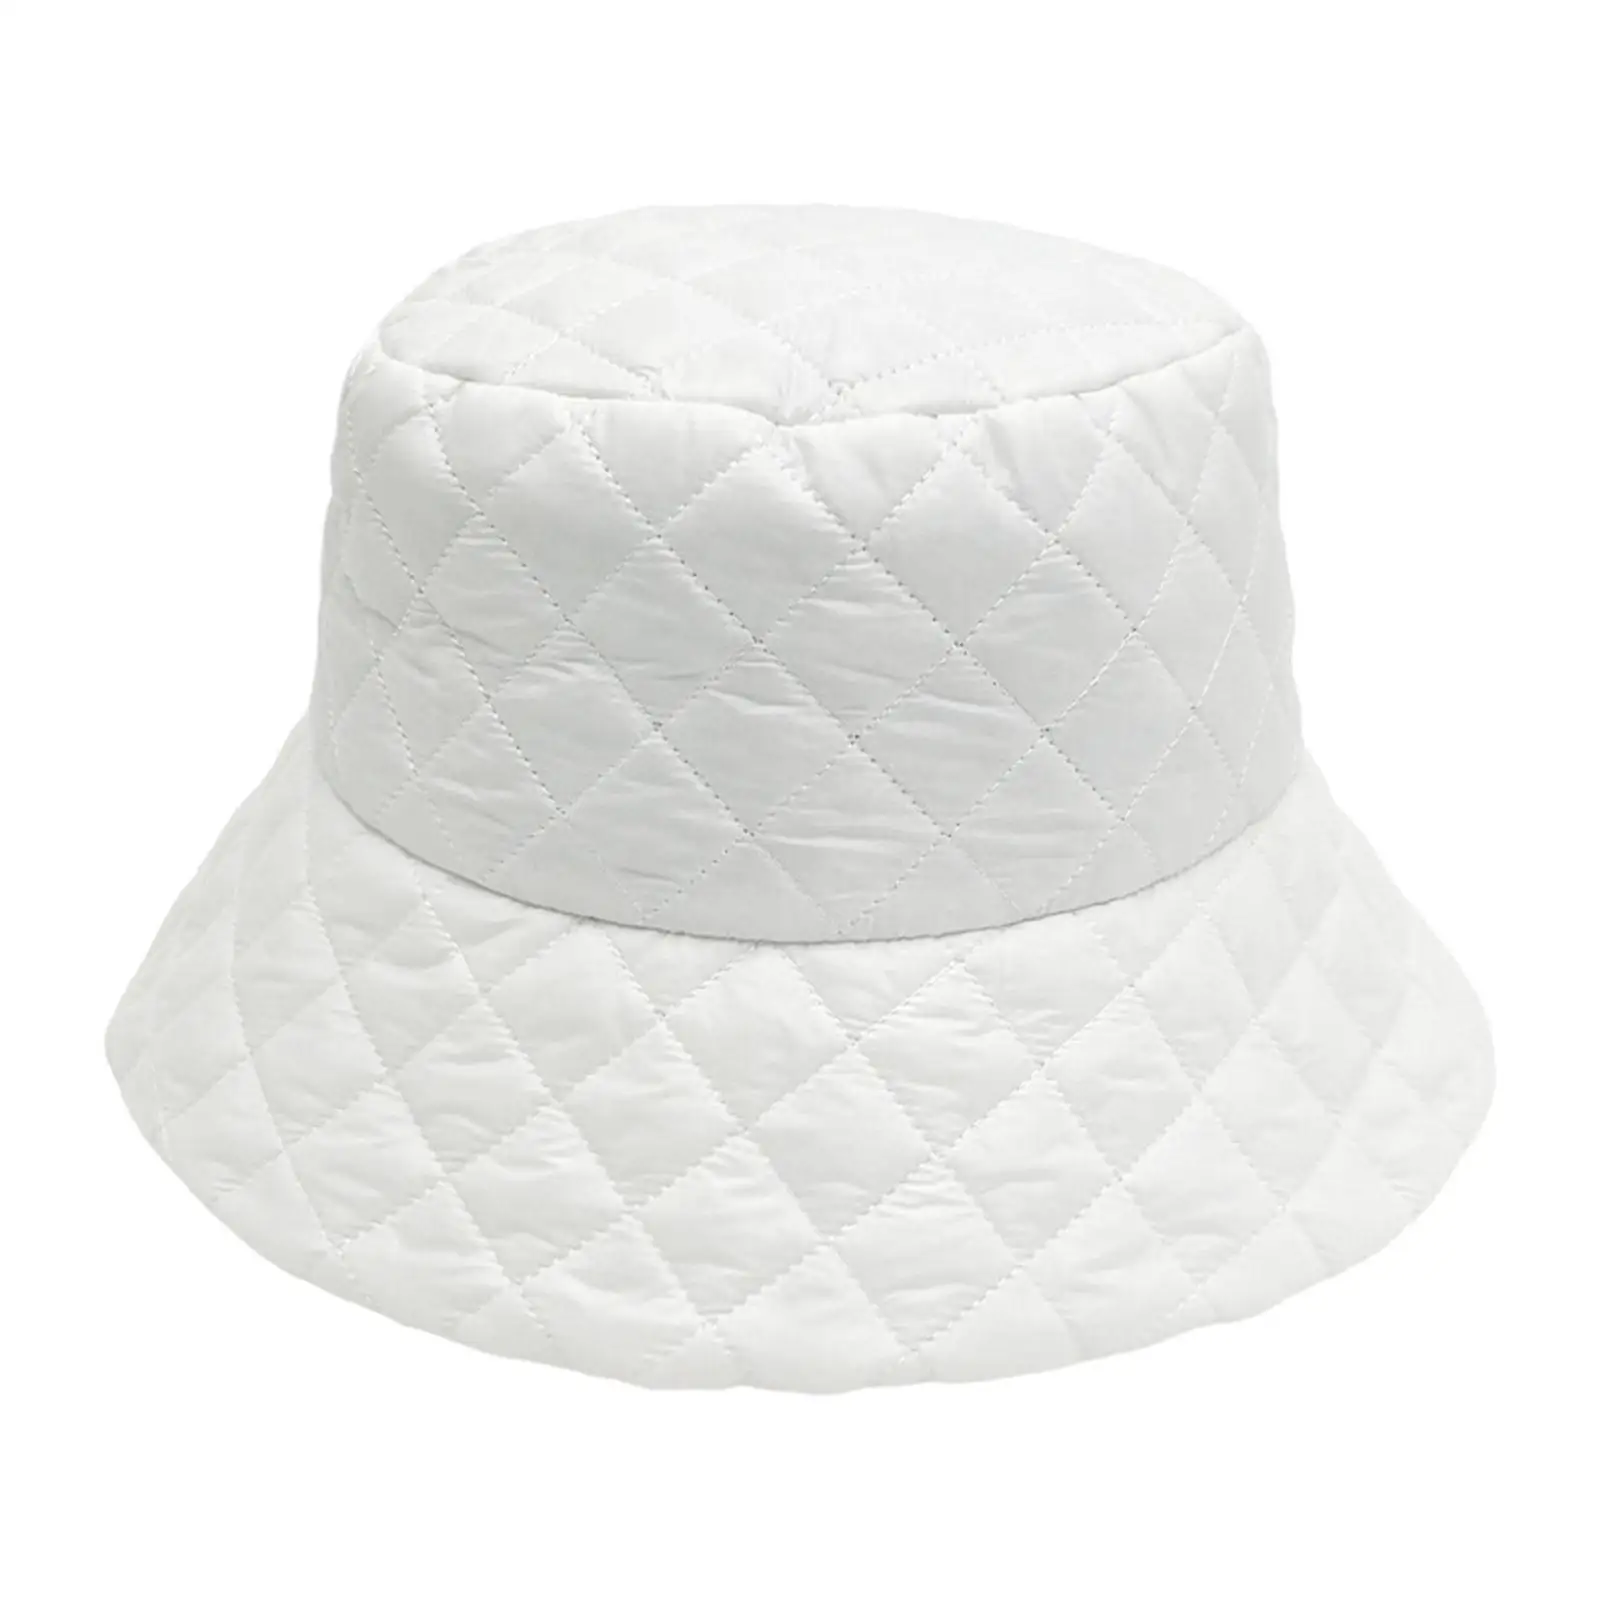 Winter Bucket Hat Soft Comfortable Stylish Thick Down Cotton Quilted Fisherman Cap Fisherman Hat for Men Women Girls Adults